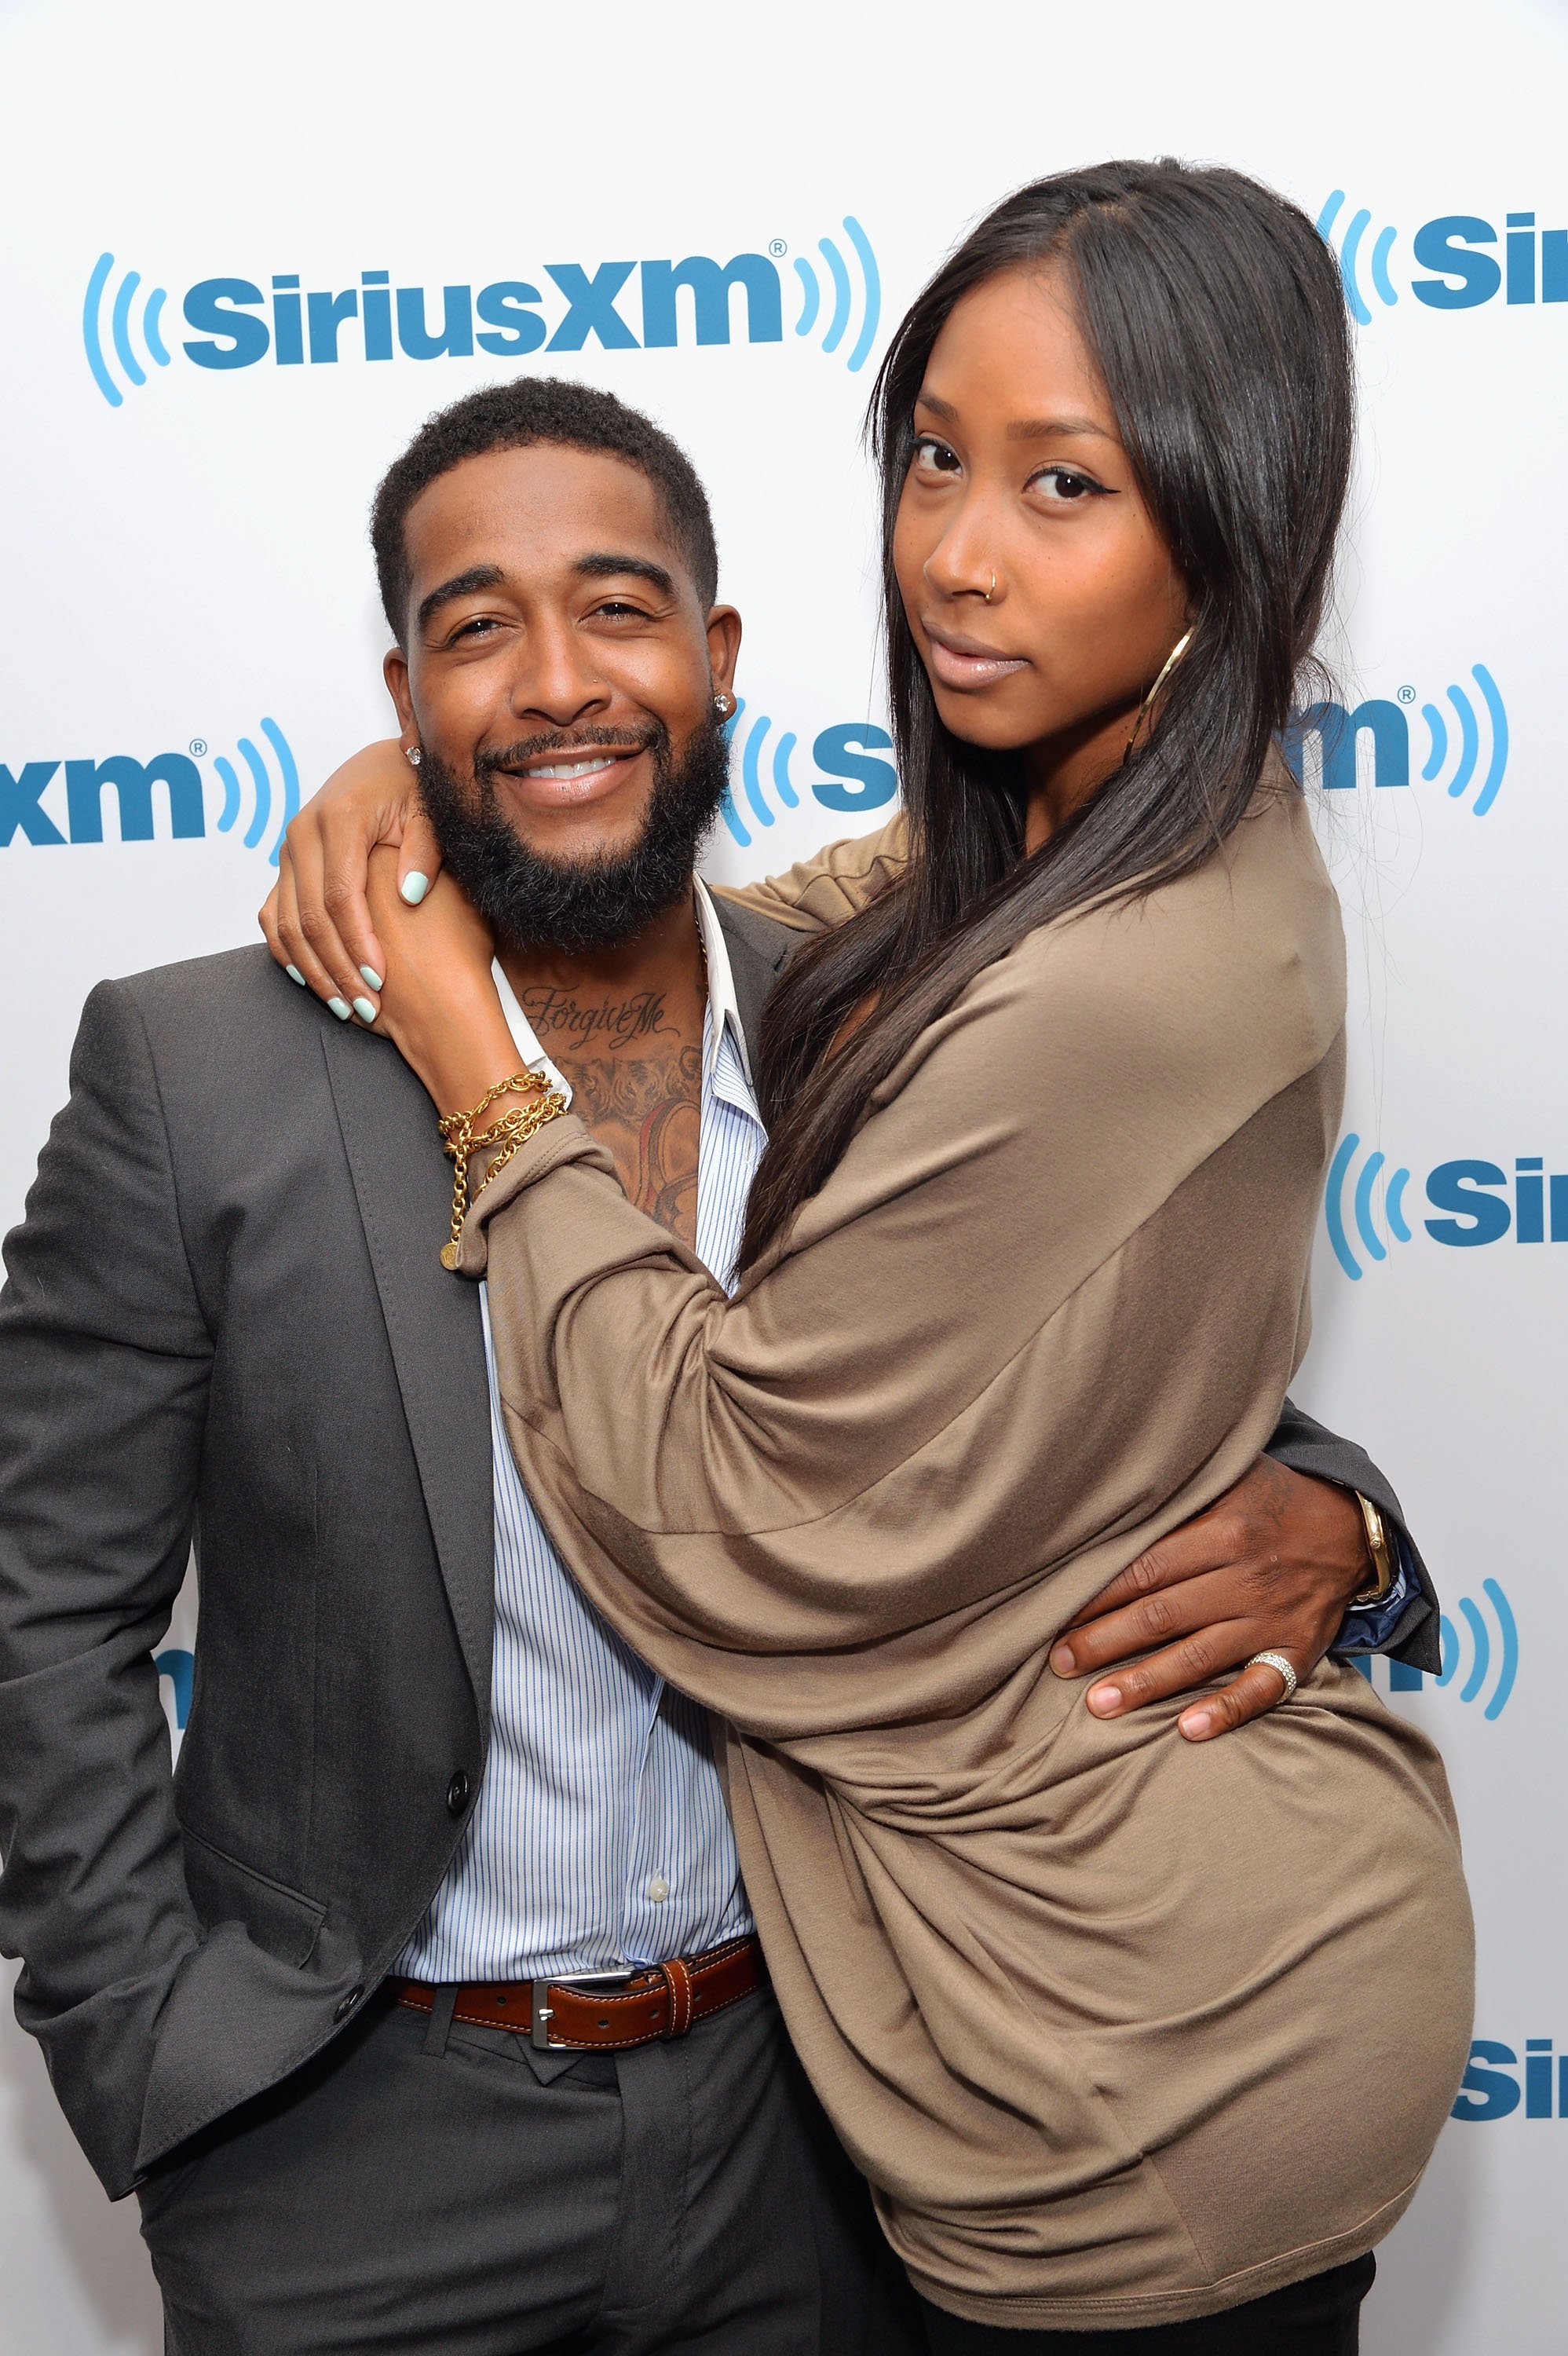 Omarion & Apryl Jones visit SiriusXM Studios on May 1, 2014 in New York City. |Photo: Getty Images